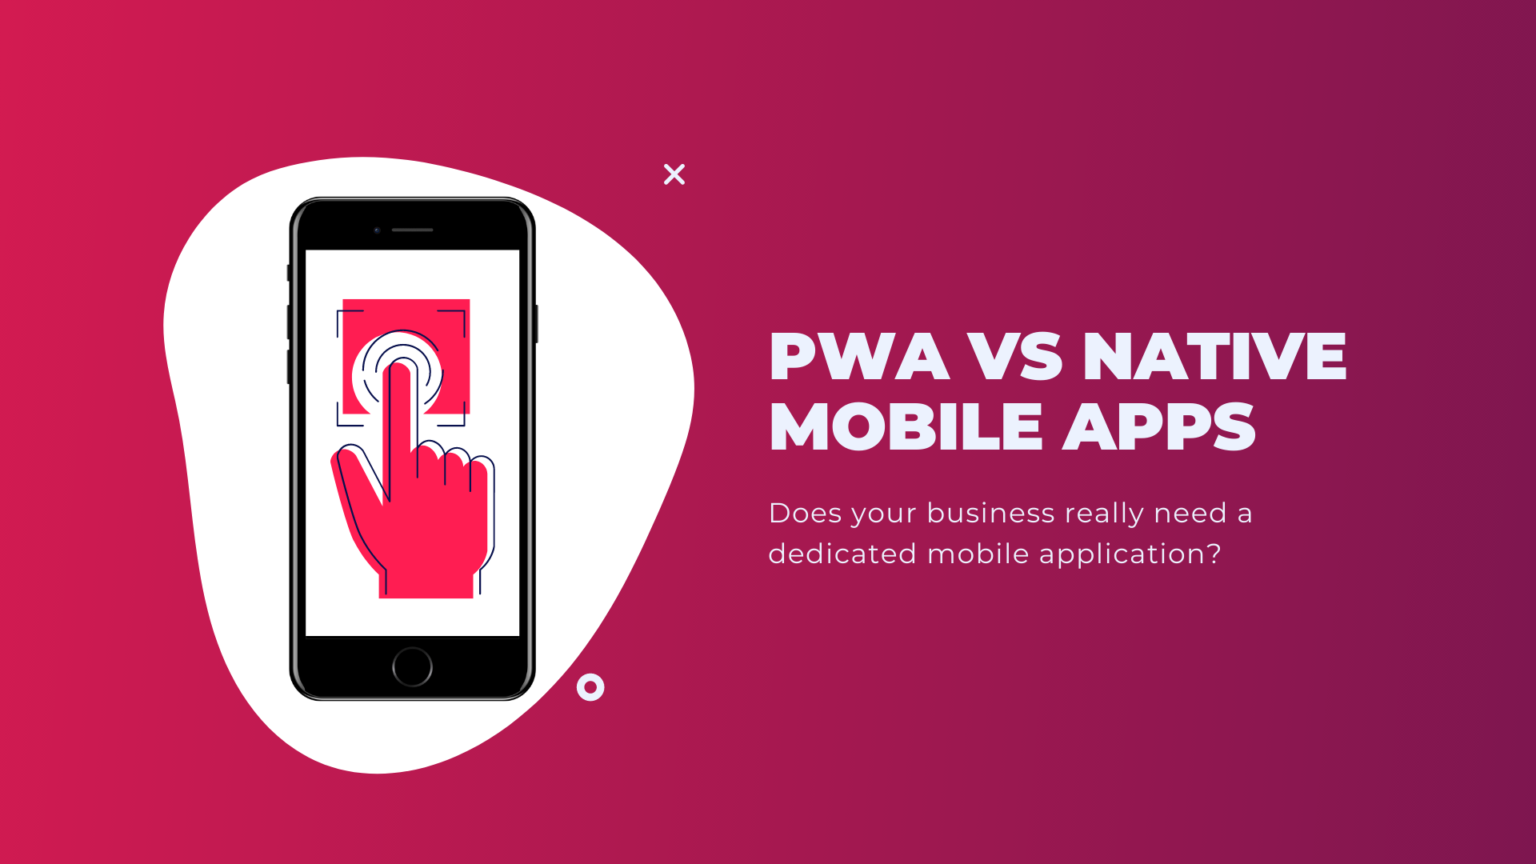 PWA vs mobile apps – does your business really need a dedicated mobile application?